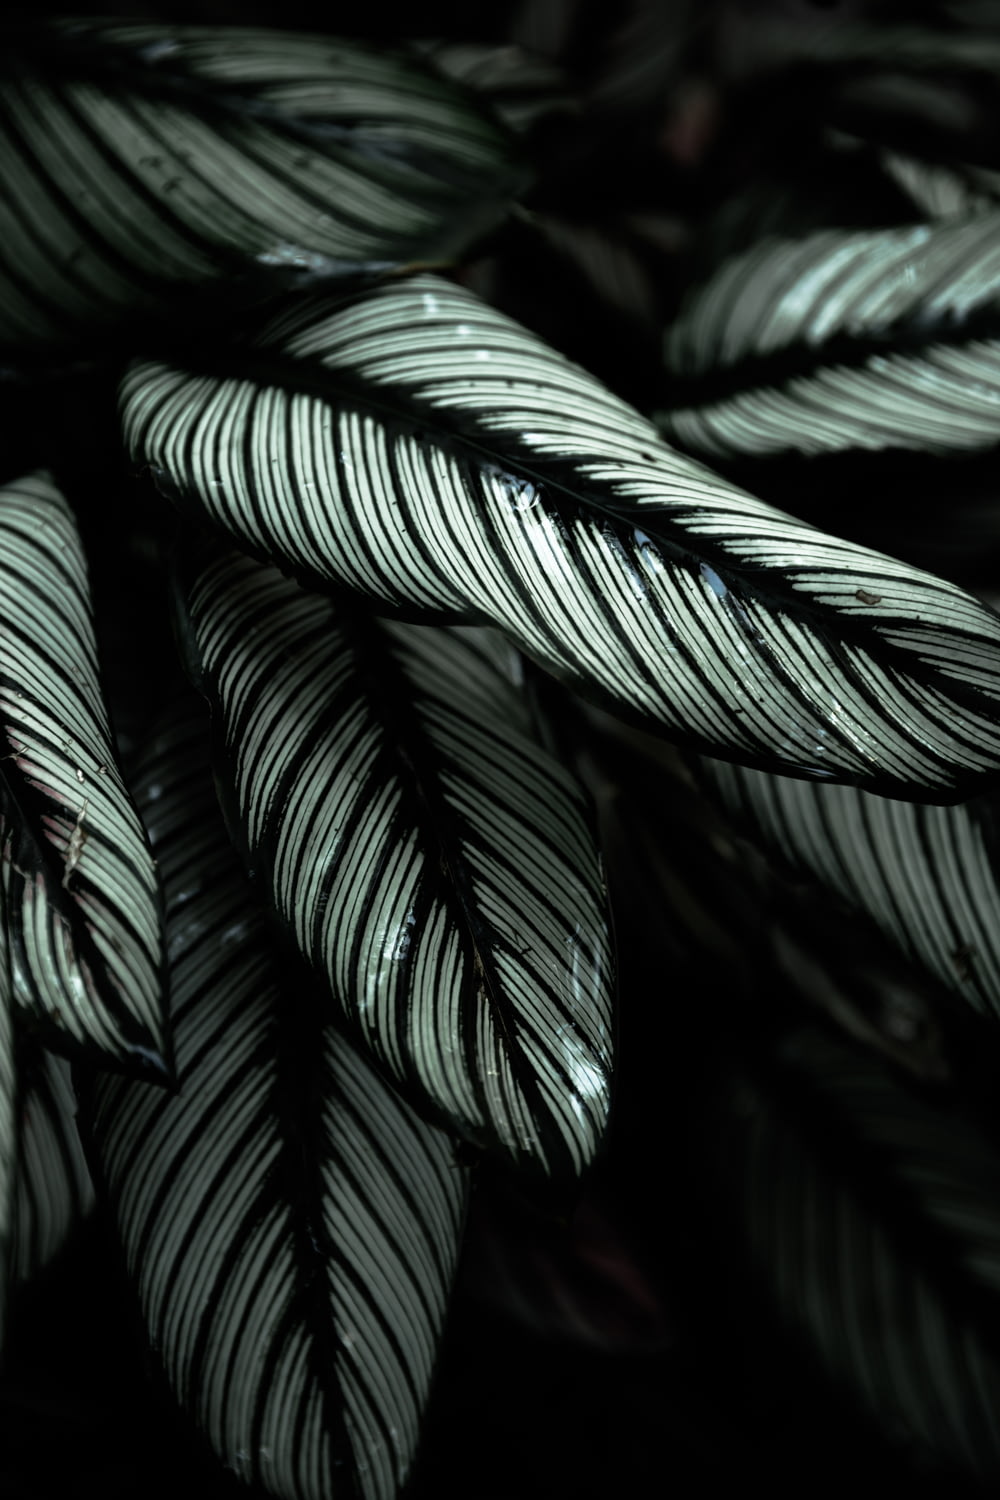 gray and black-leafed plants